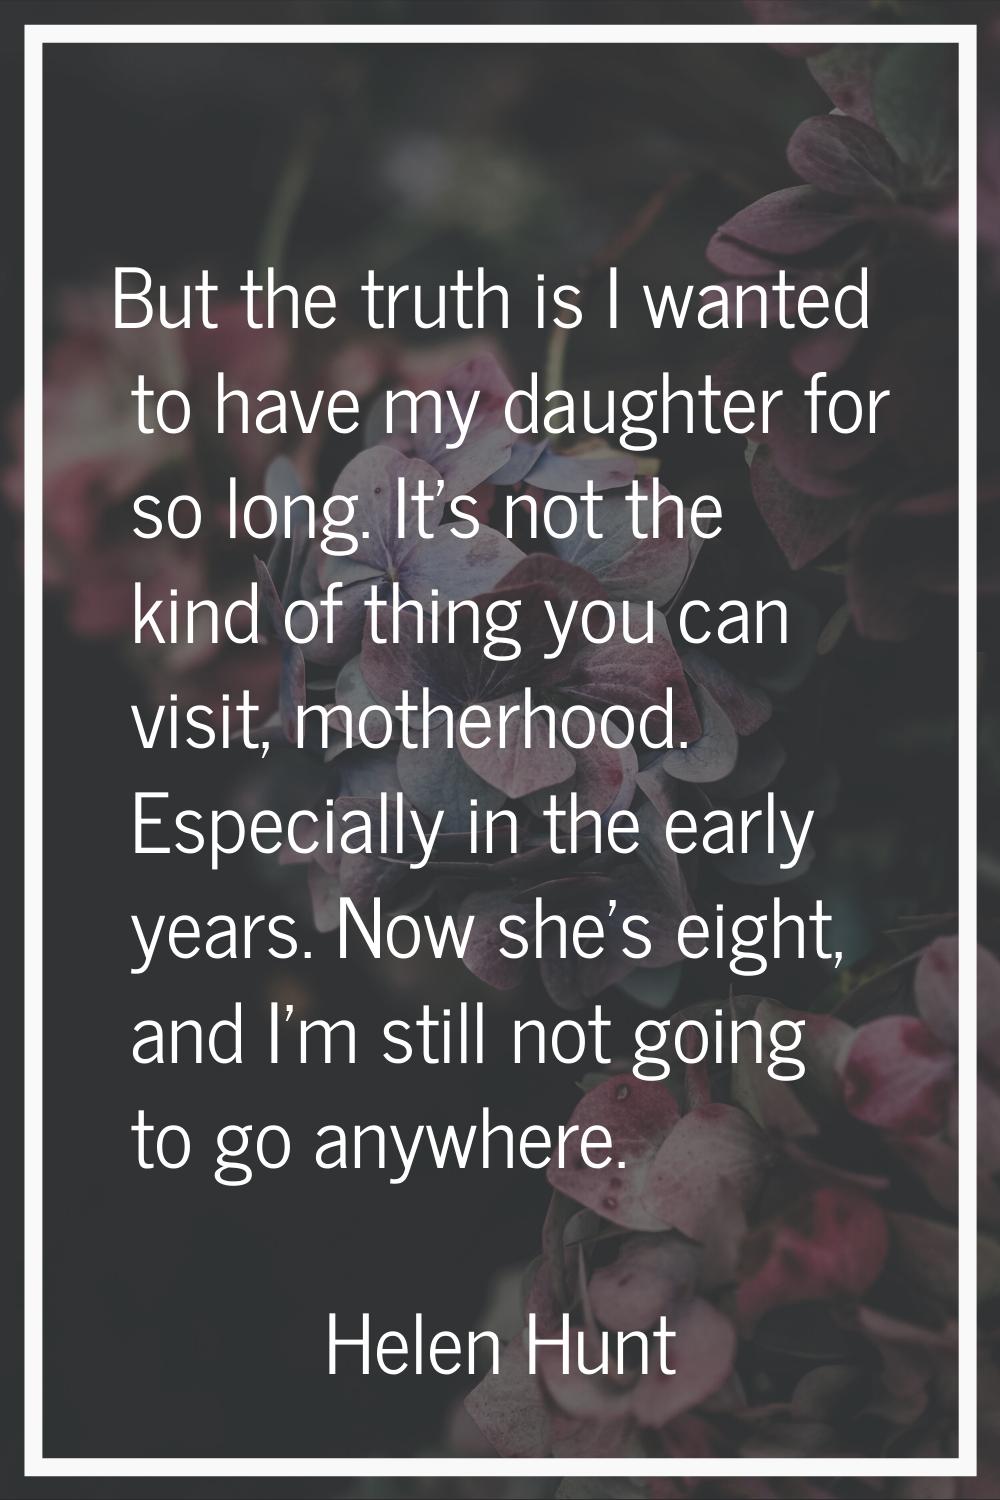 But the truth is I wanted to have my daughter for so long. It's not the kind of thing you can visit